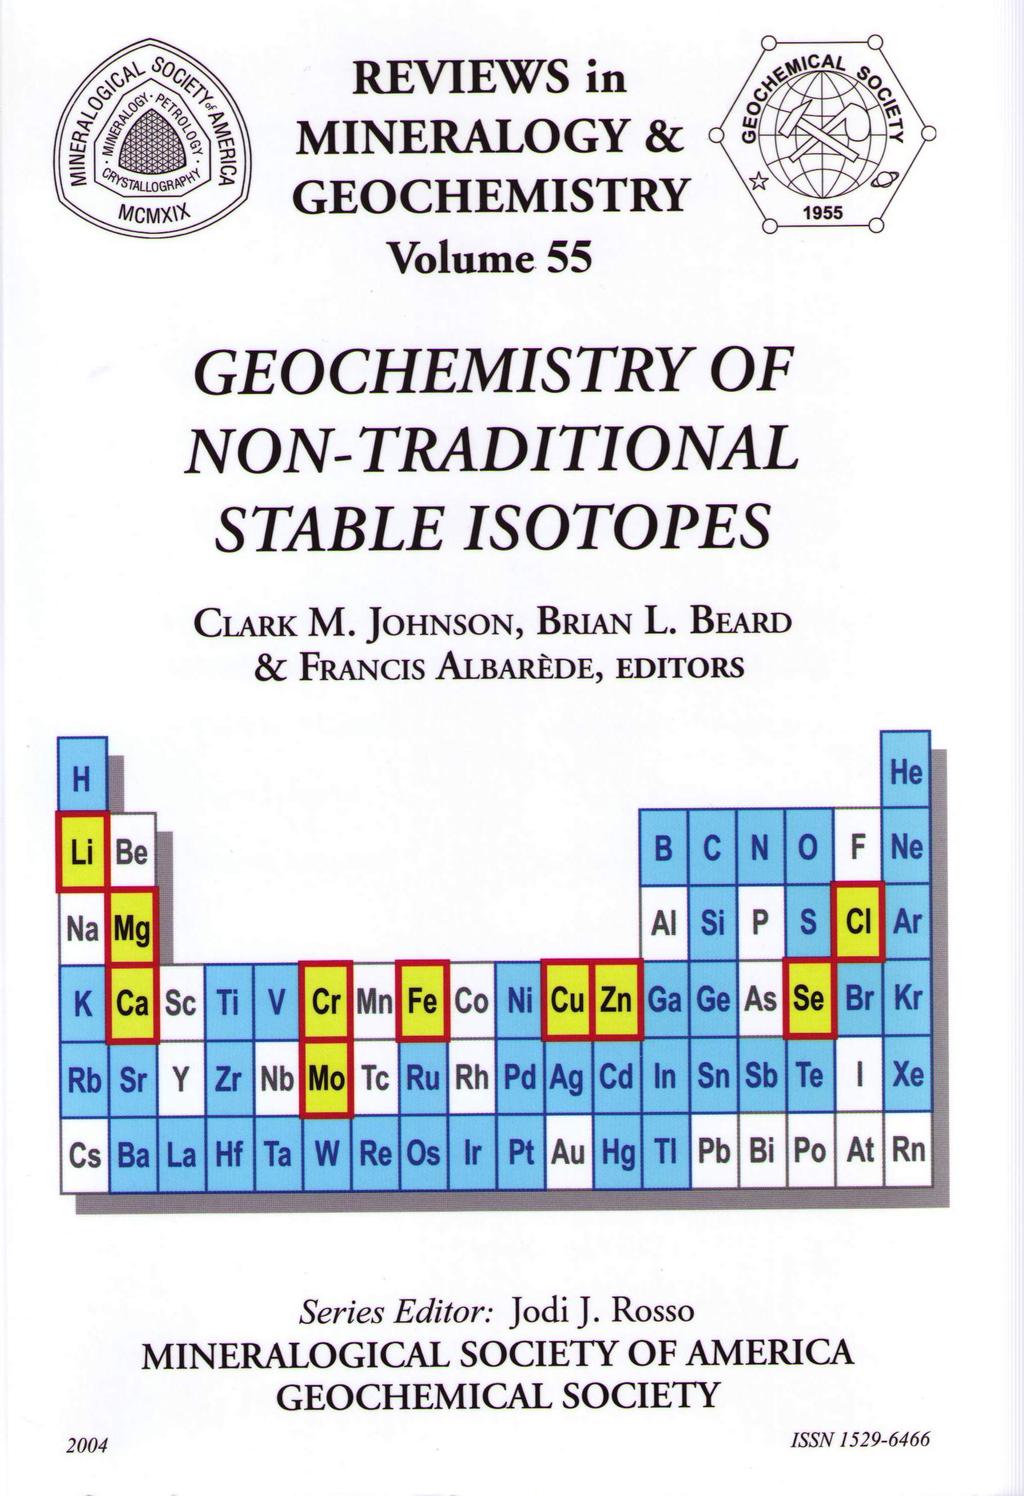 (2004) What About the Rest of the Periodic Table? recent instrumentation development allows for stable isotope analysis of many other elements e.g.